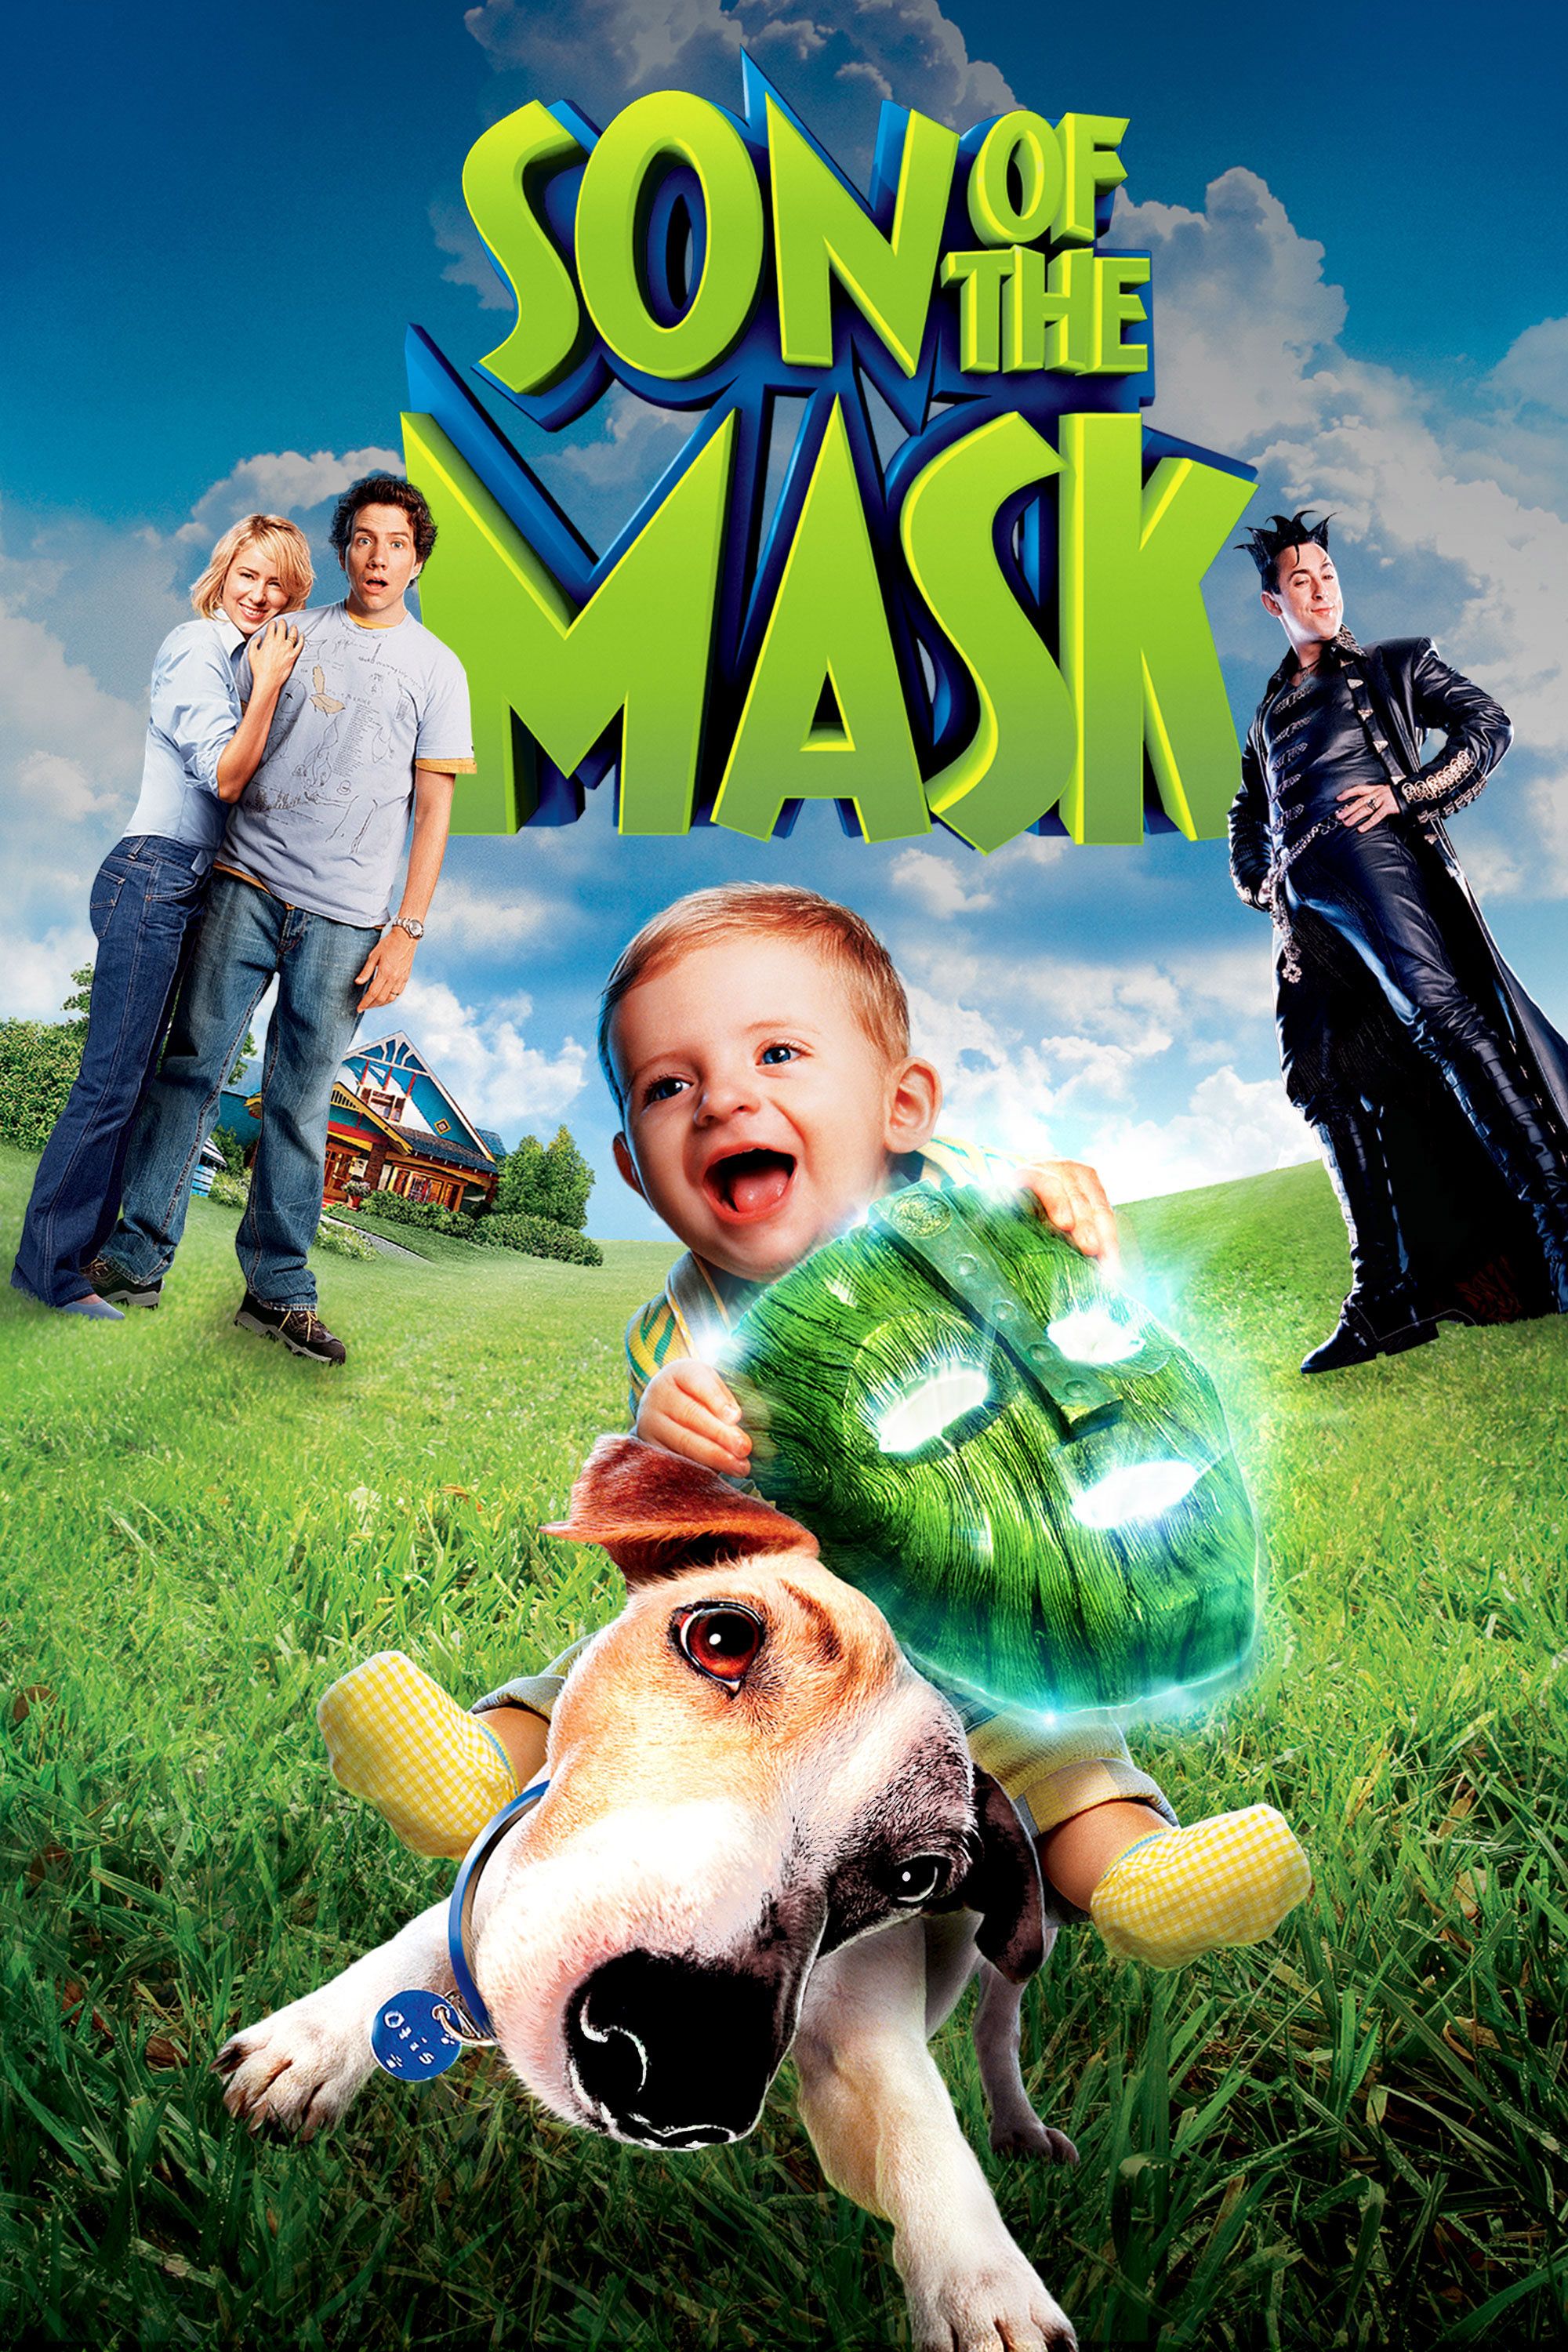 Son of mask full movie download in hindi